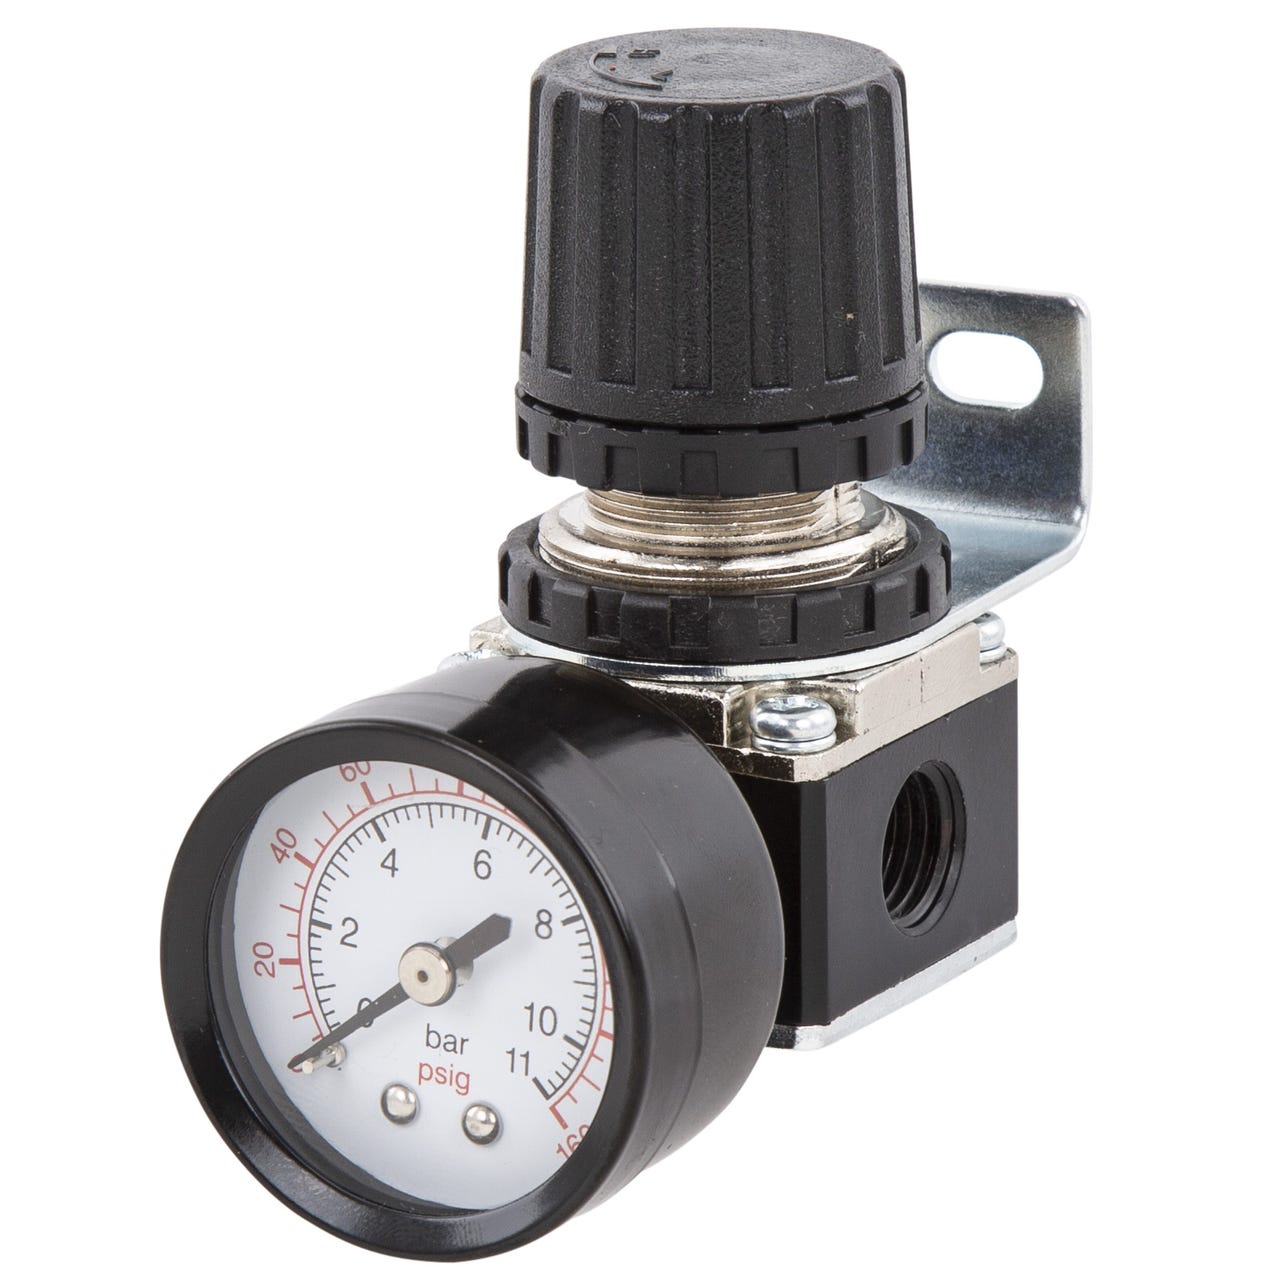 Mini Compact Air Regulator with built in guage 1/4 Bsp ports for air Systems 